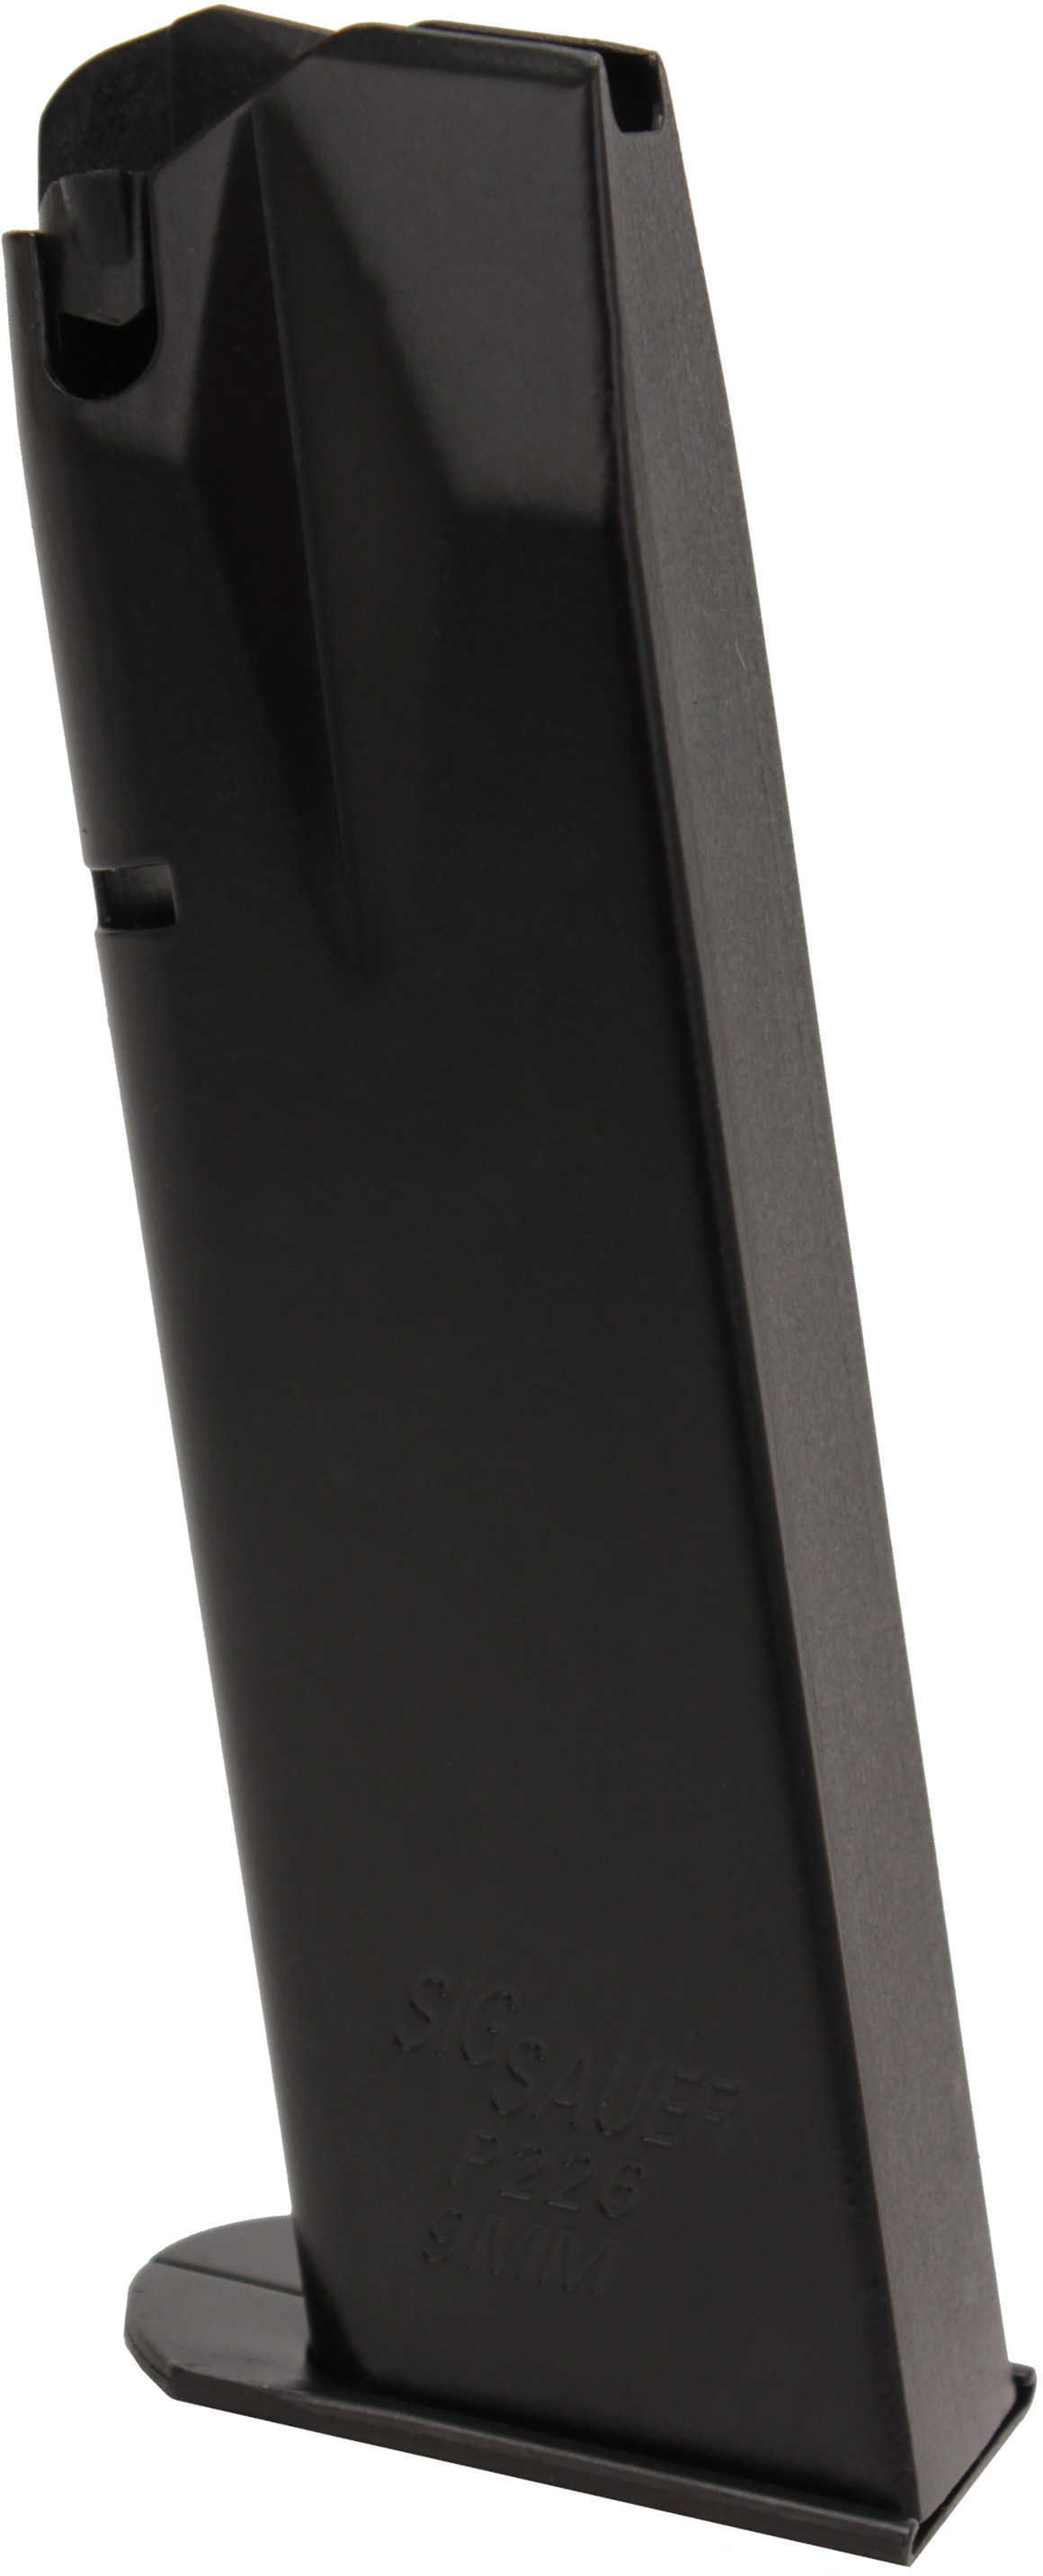 Sig Sauer Magazine P226 - 9mm - 15 Rounds Not available for shipment to all states MAG226915